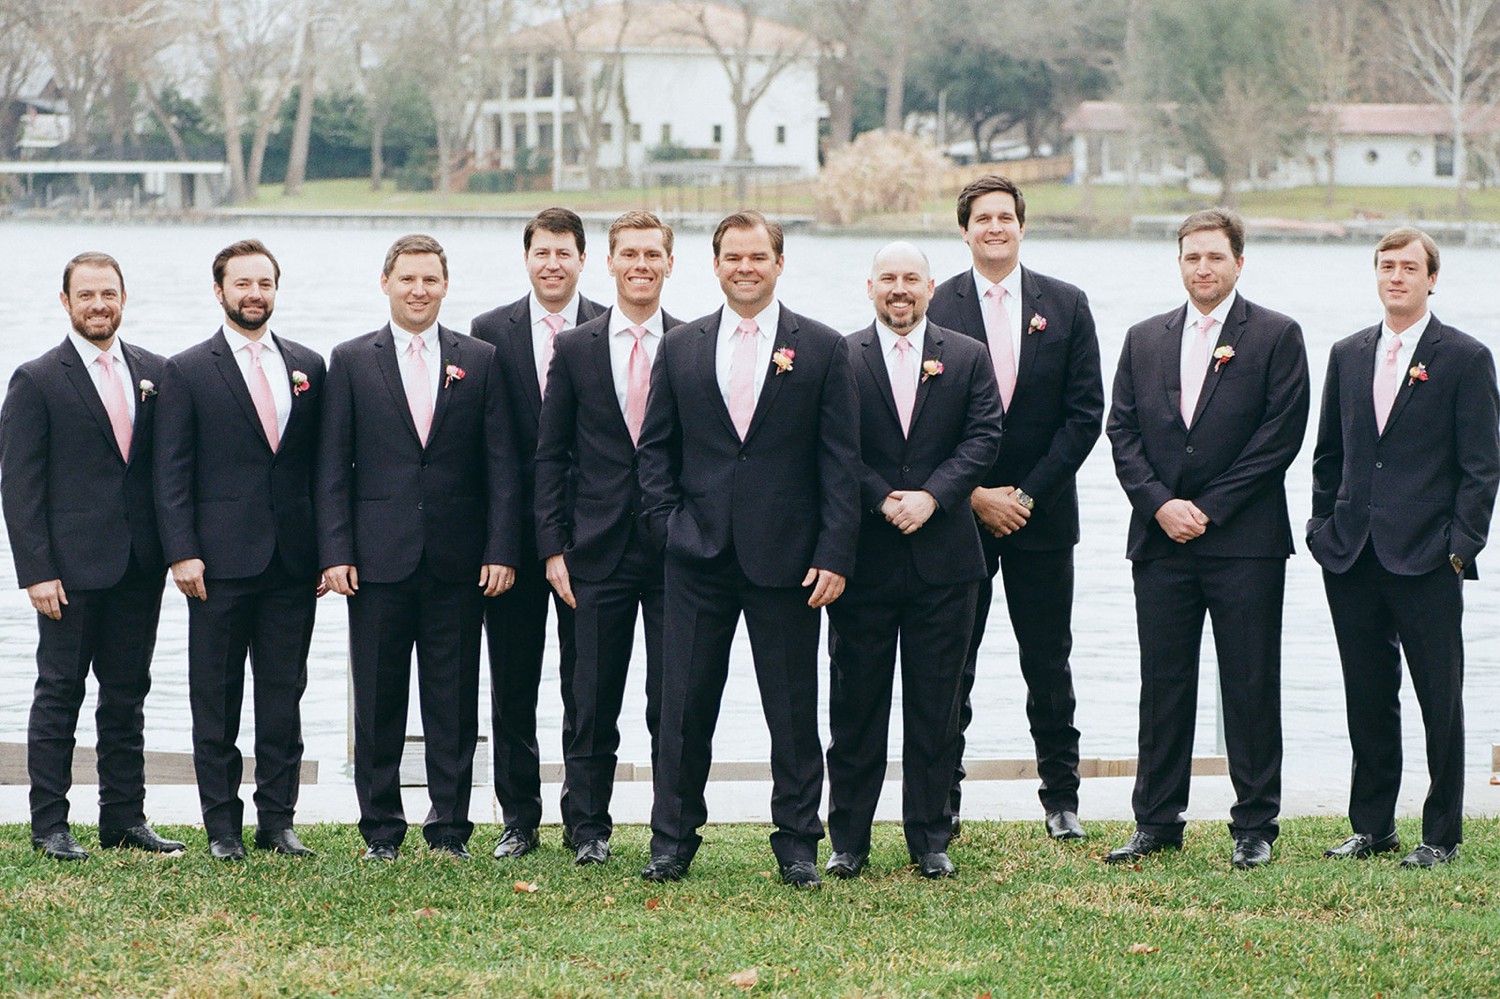 Groomsmen Photos in front of Lake for Texas Wedding